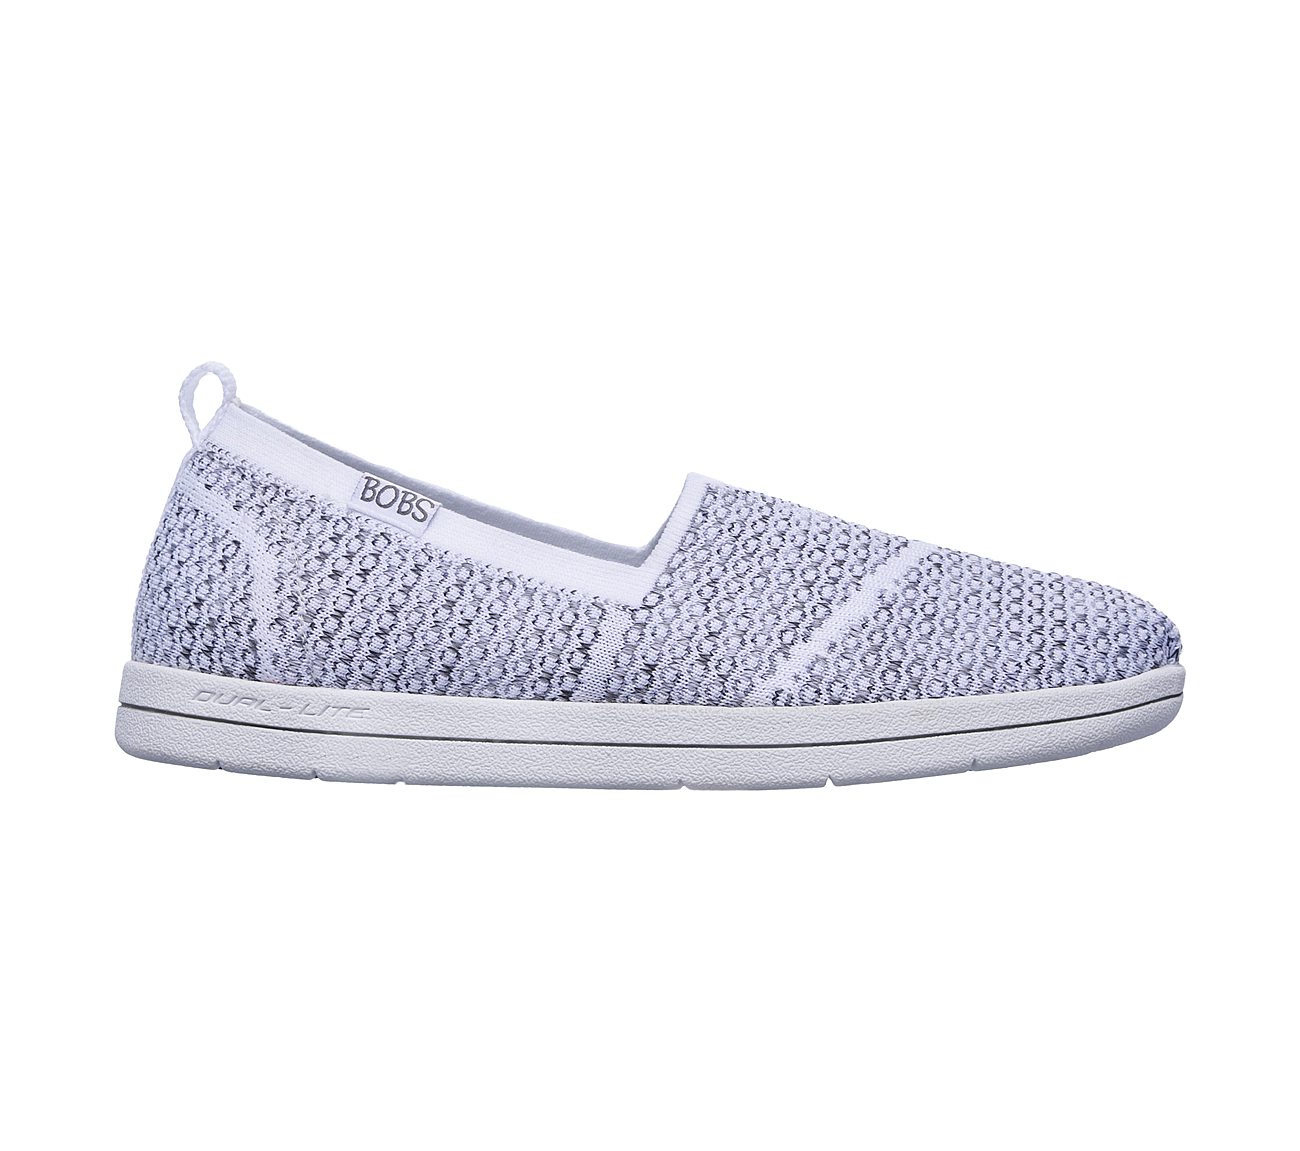 stretch knit shoes from skechers